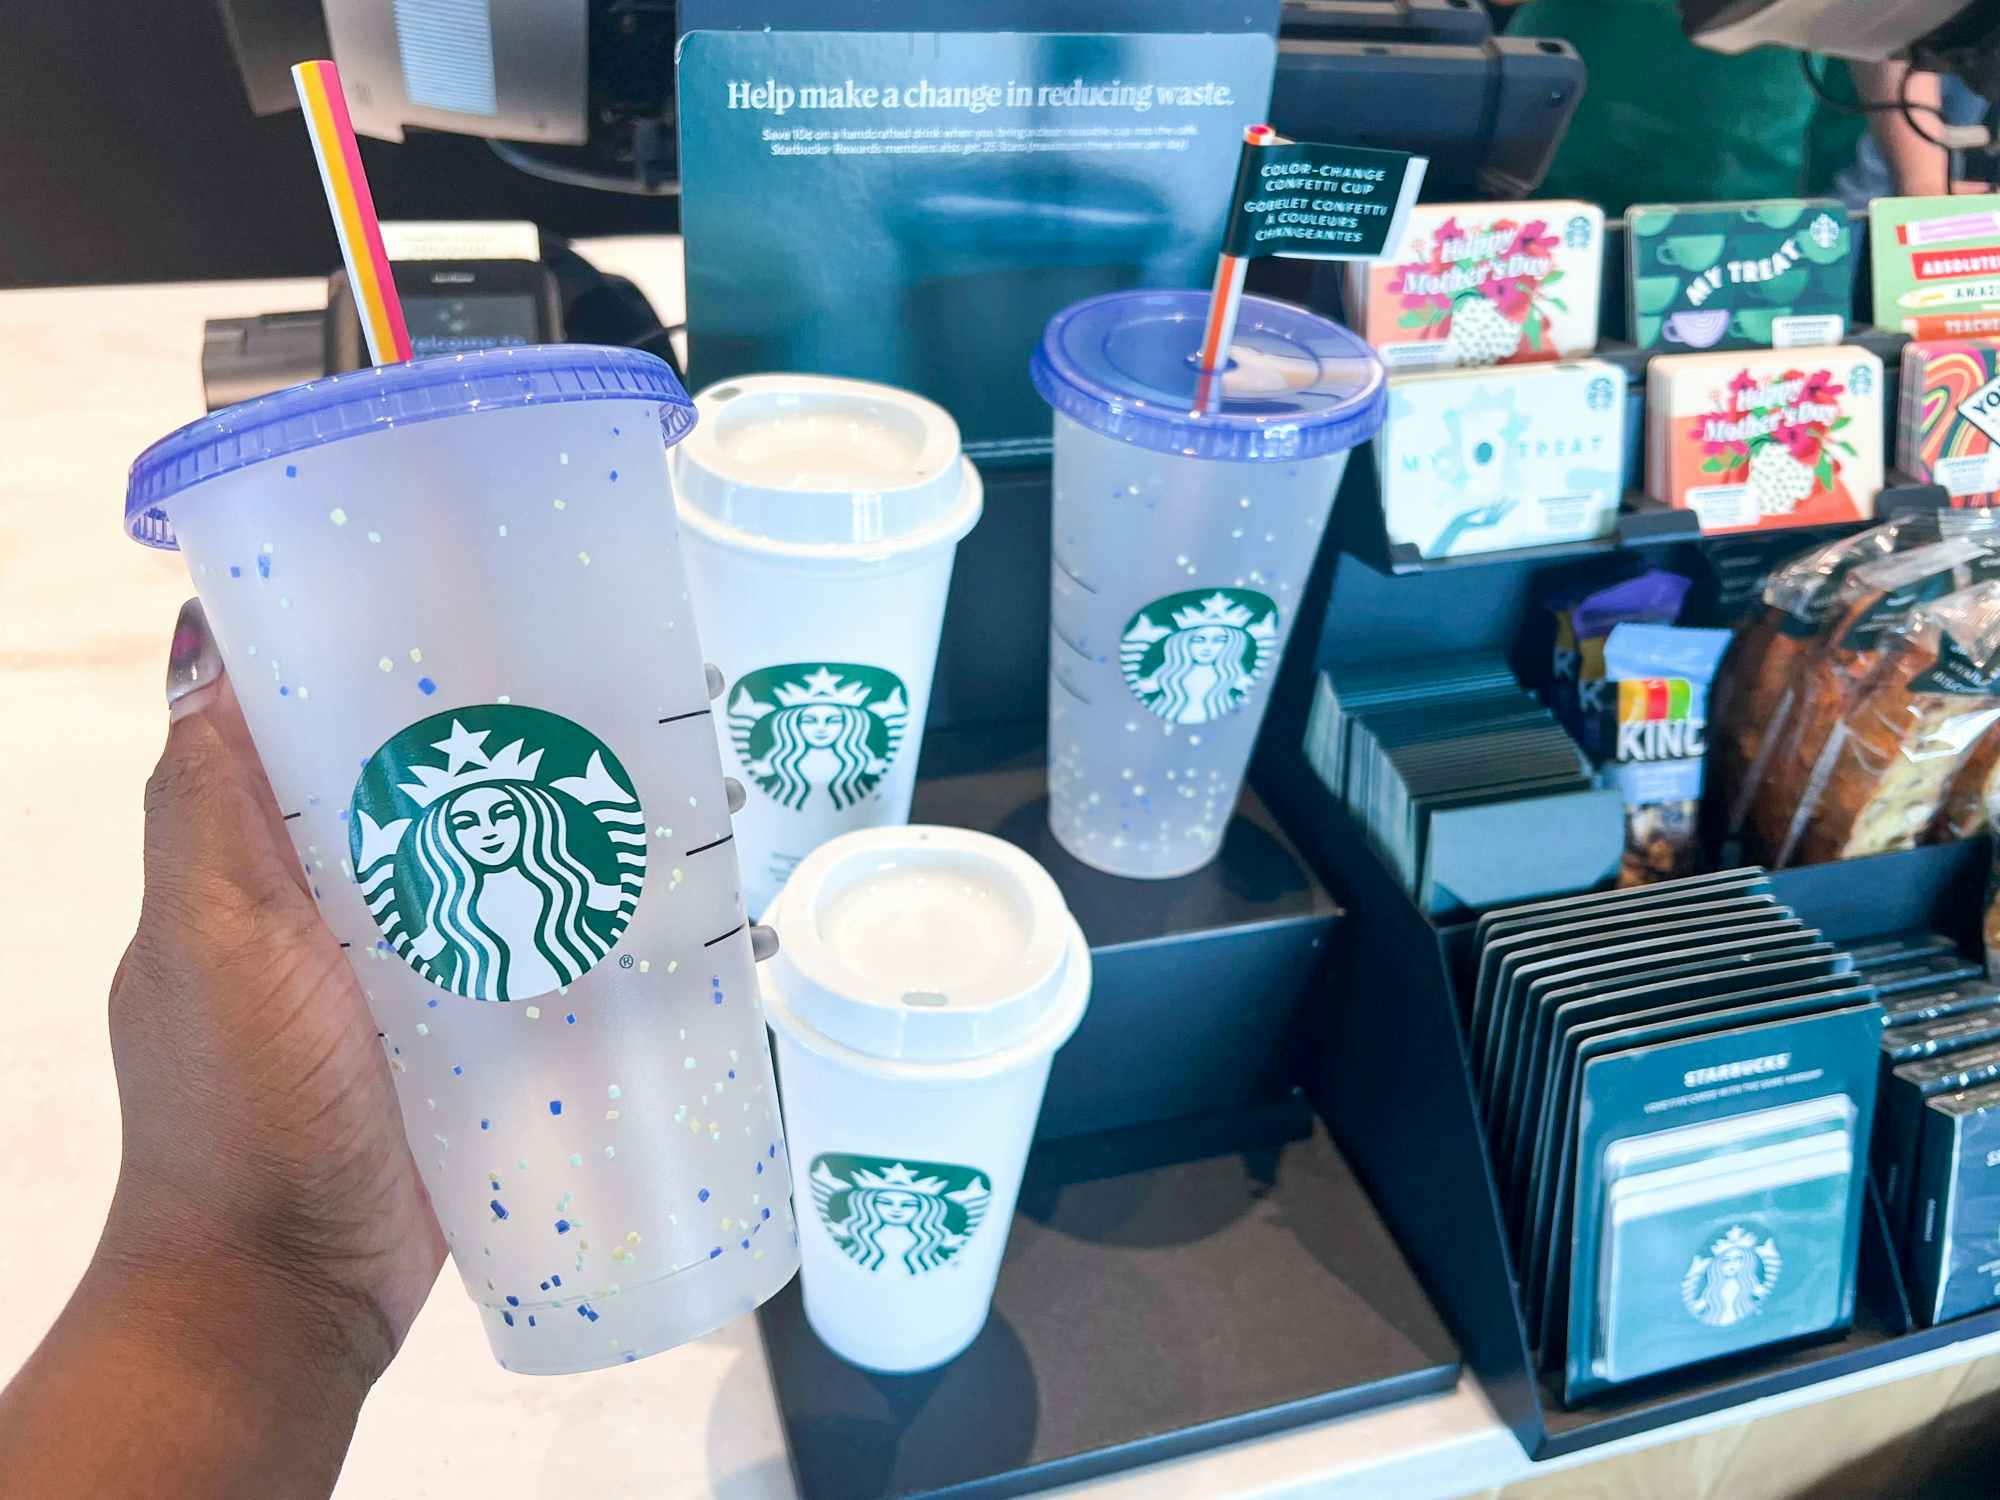 Someone holding a Starbucks Summer cup inside a Starbucks